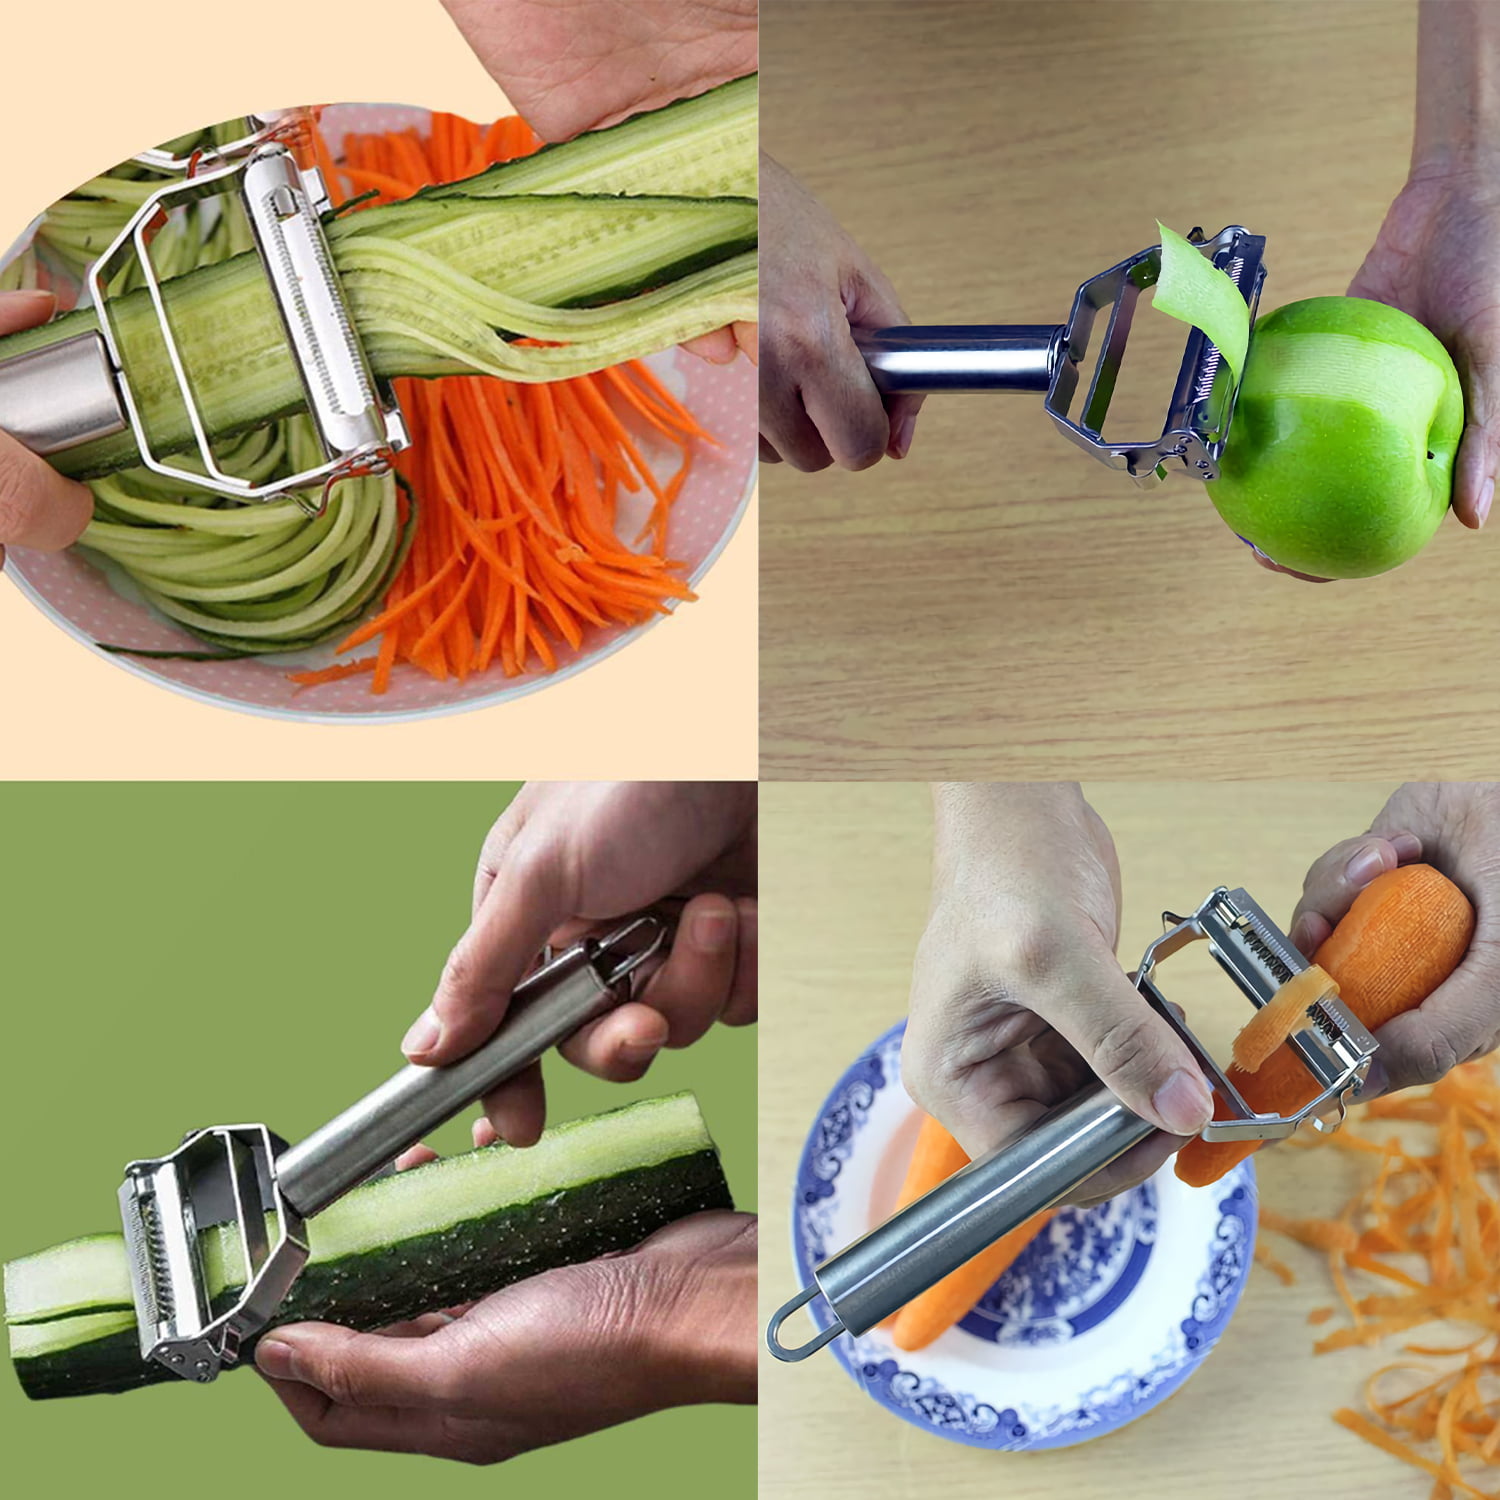 Bonano 2 Pieces Set of Peeler with Container Stainless Steel blade,Both Fruits and Vegetables Are suitable., 9*5*2